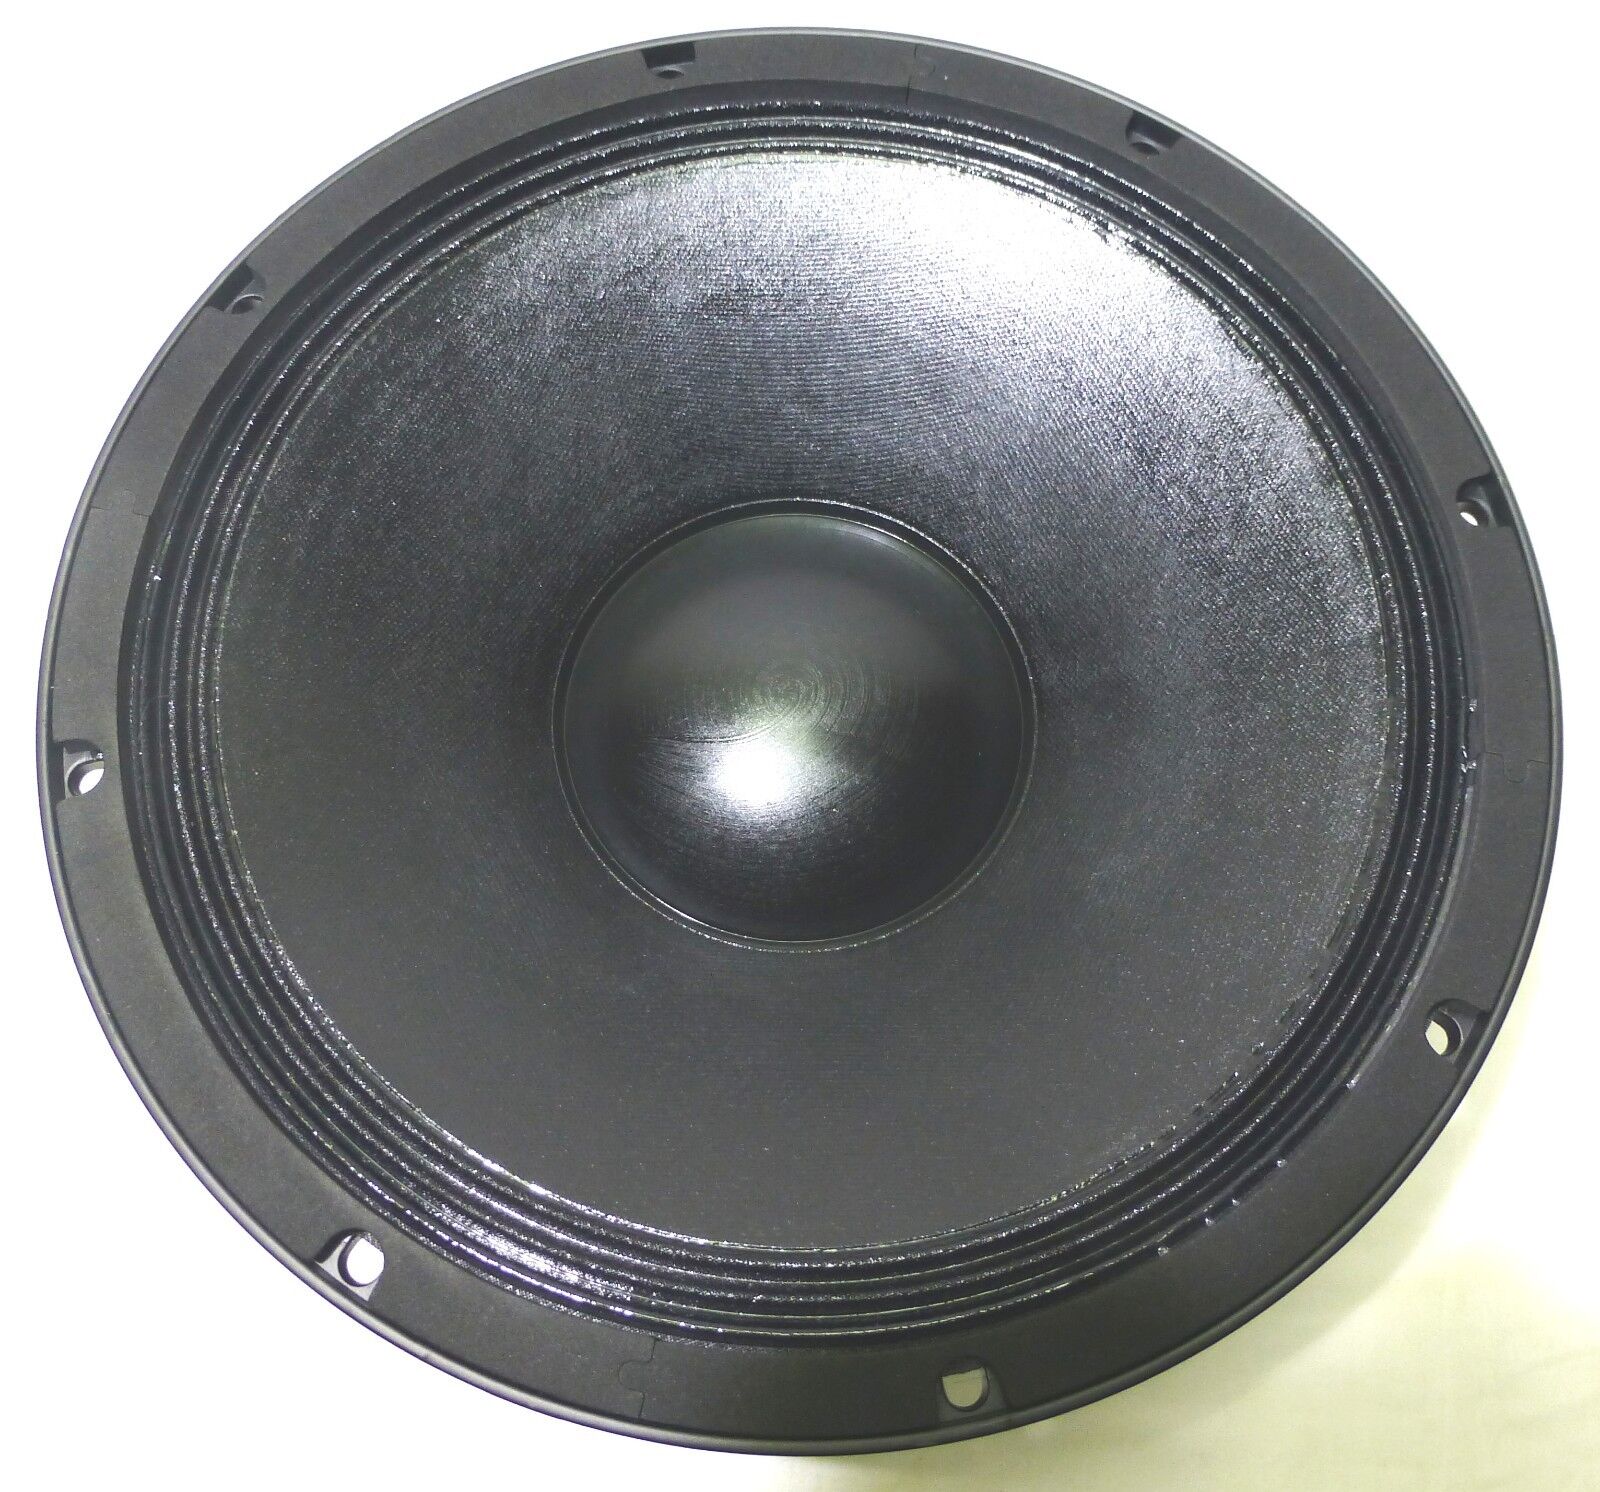 LASE NEO 12-1000MR Replacement 12.5" Neodymium Woofer for Mackie SRM-450